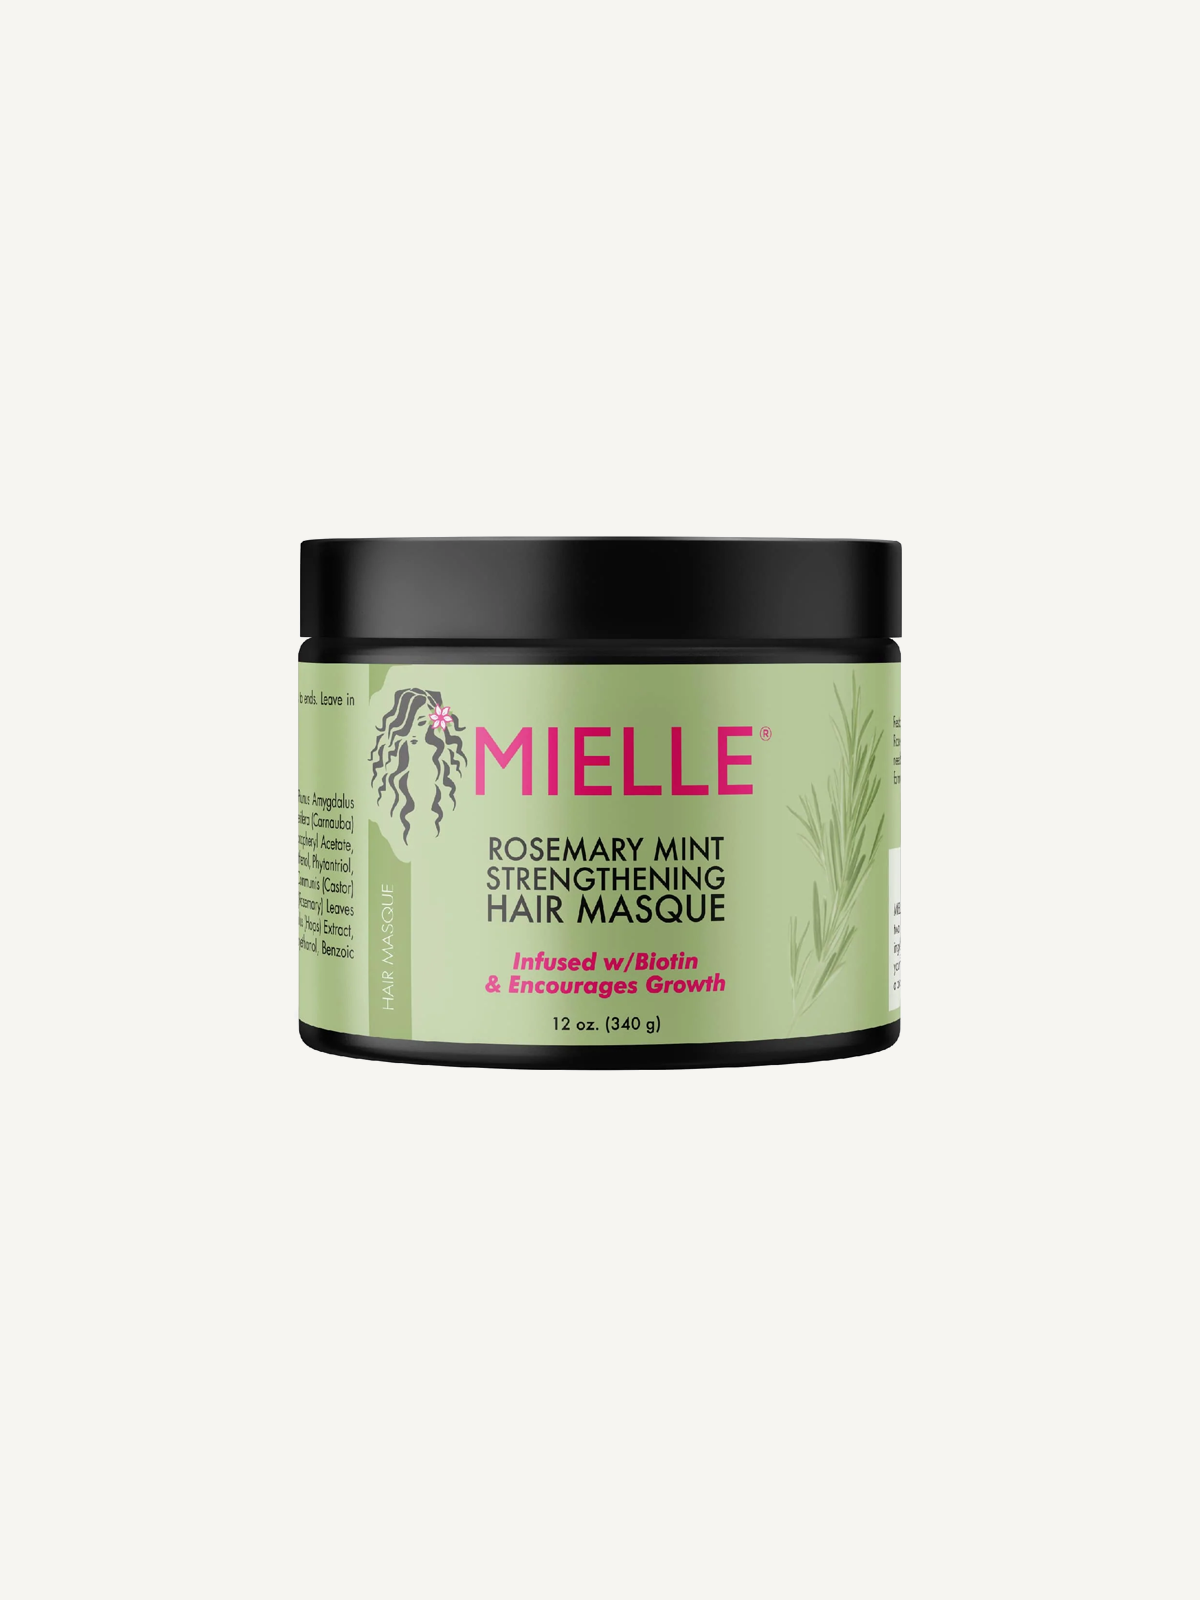 Mielle – Rosemary Mint Strengthening Hair Masque